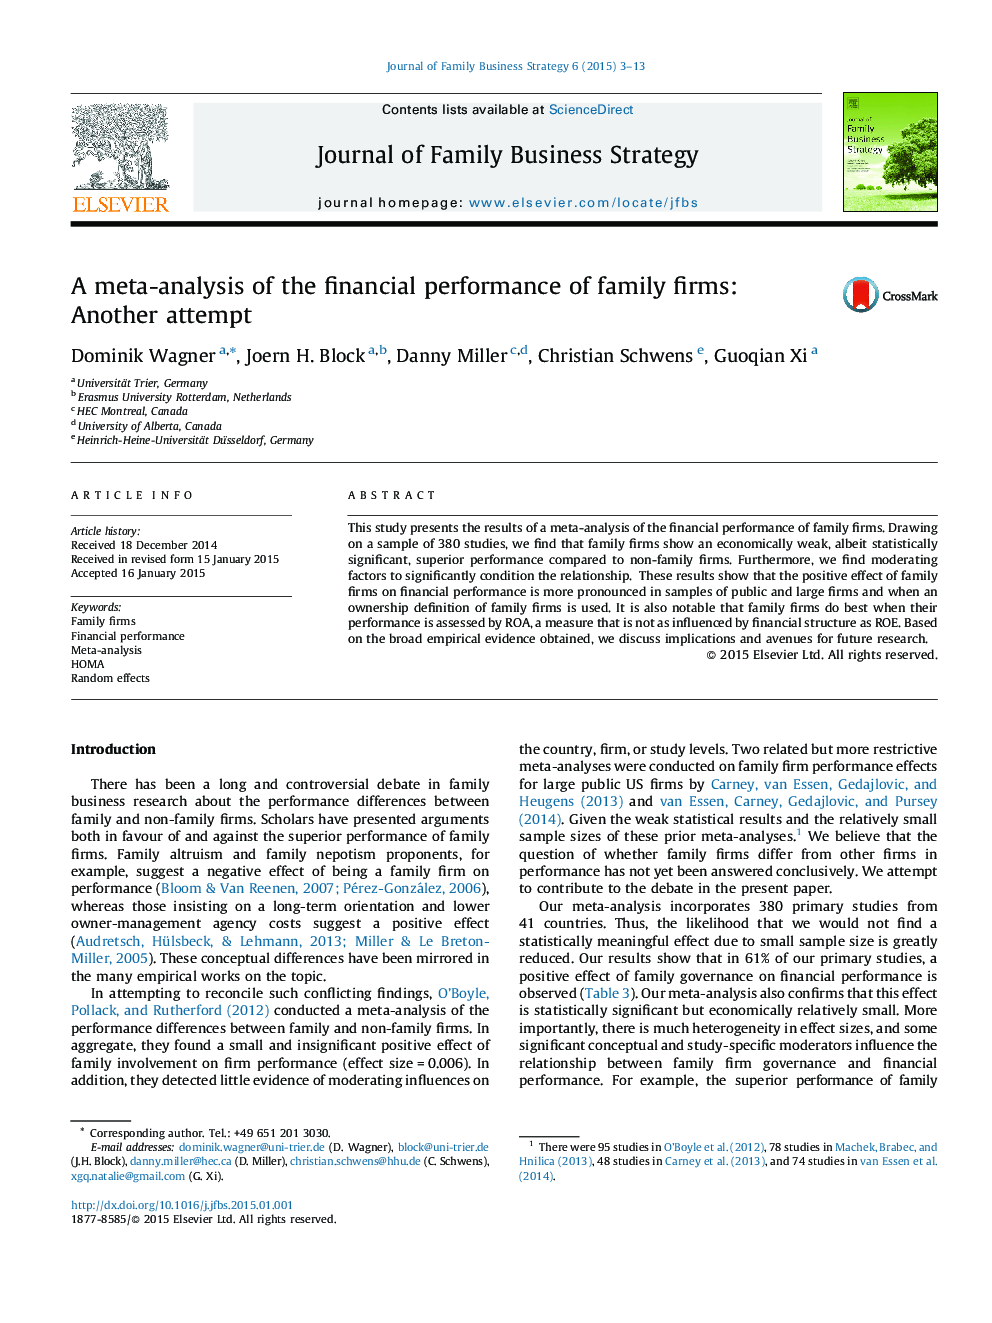 A meta-analysis of the financial performance of family firms: Another attempt